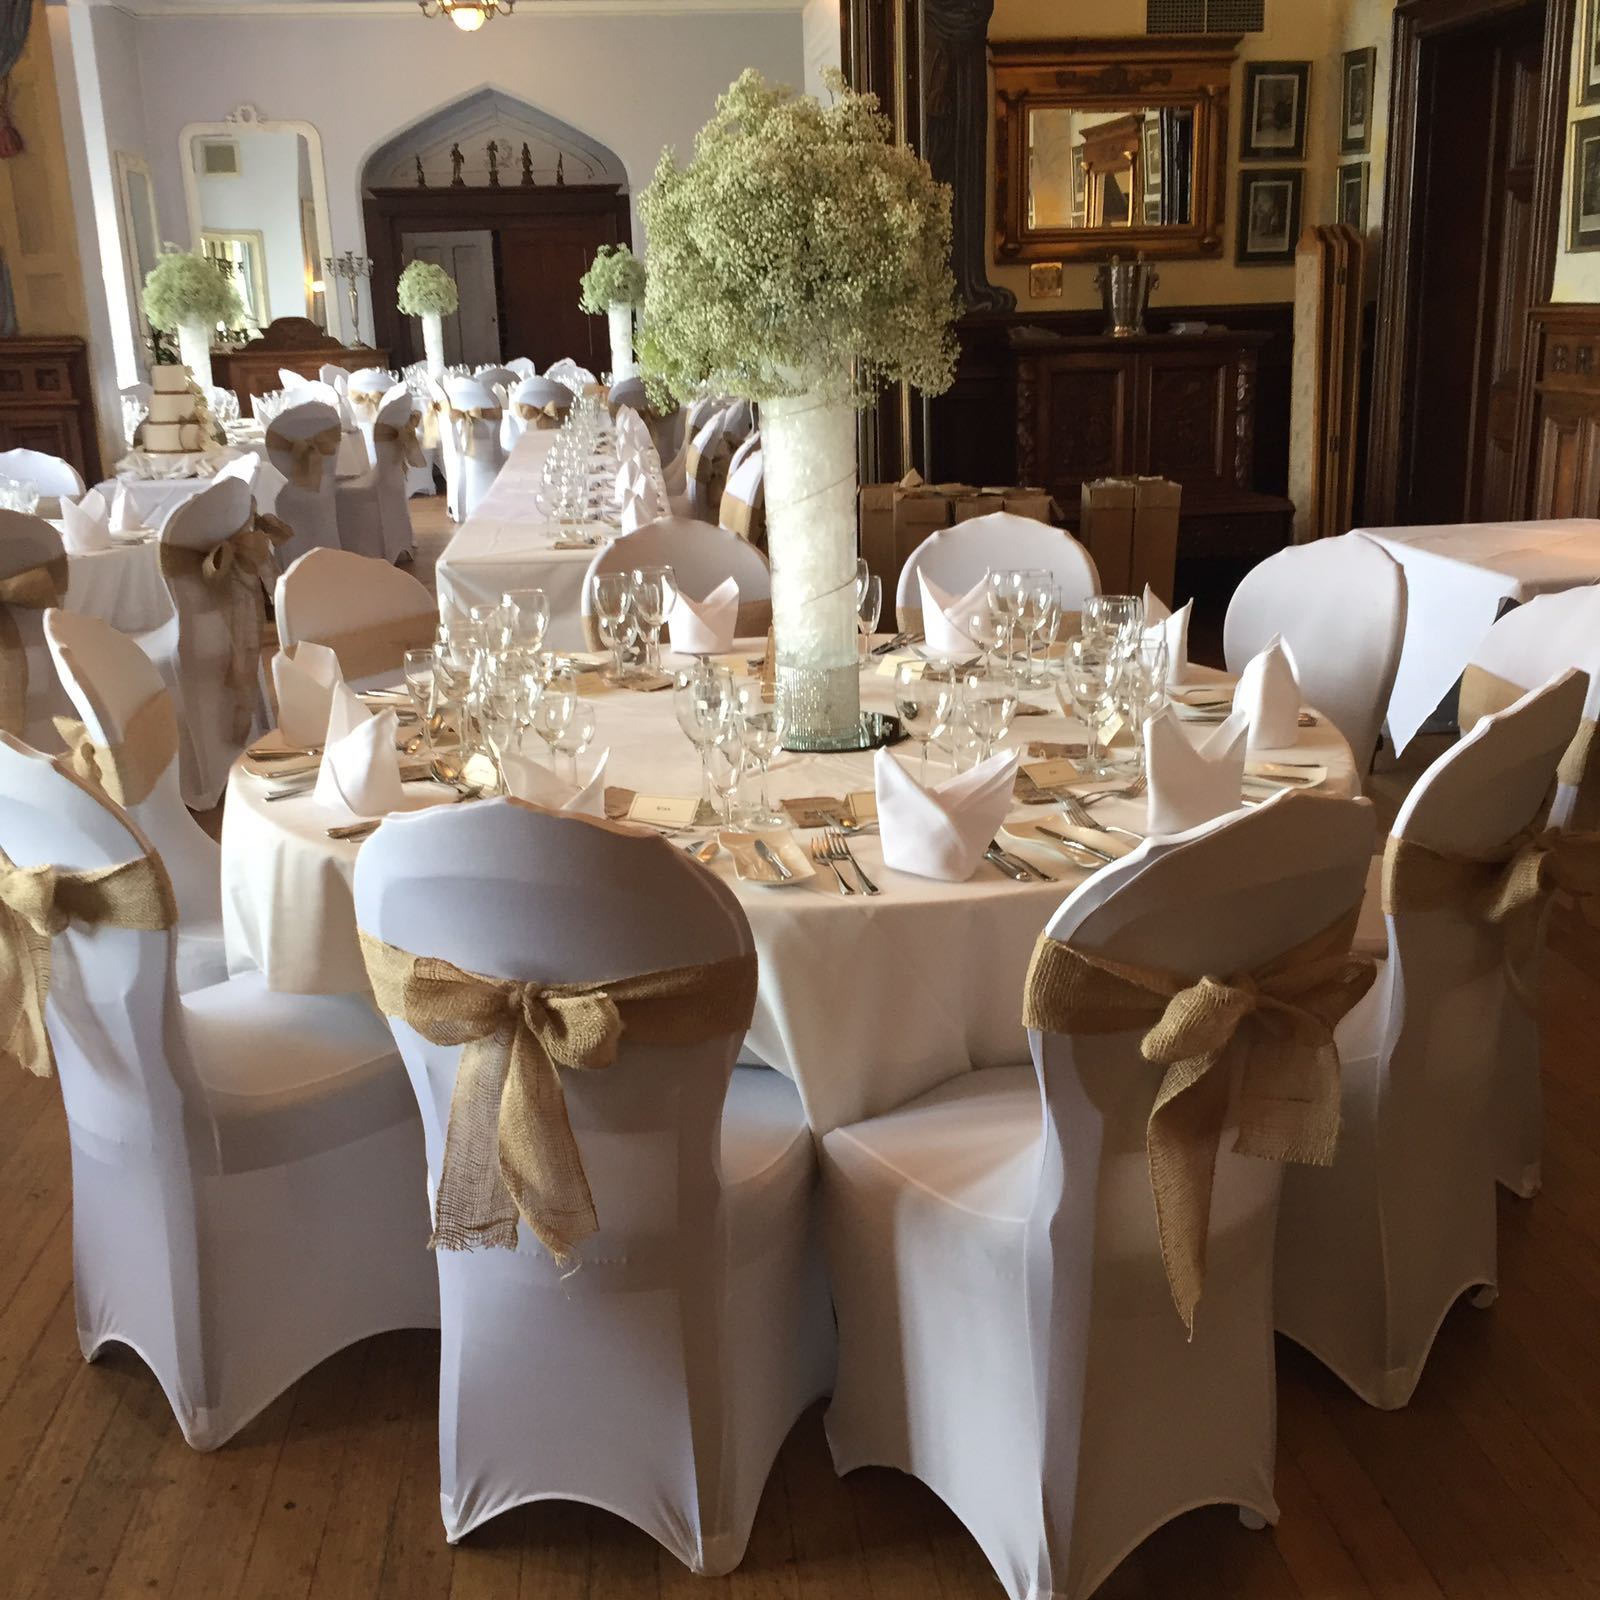 Chair cover with hessian sash